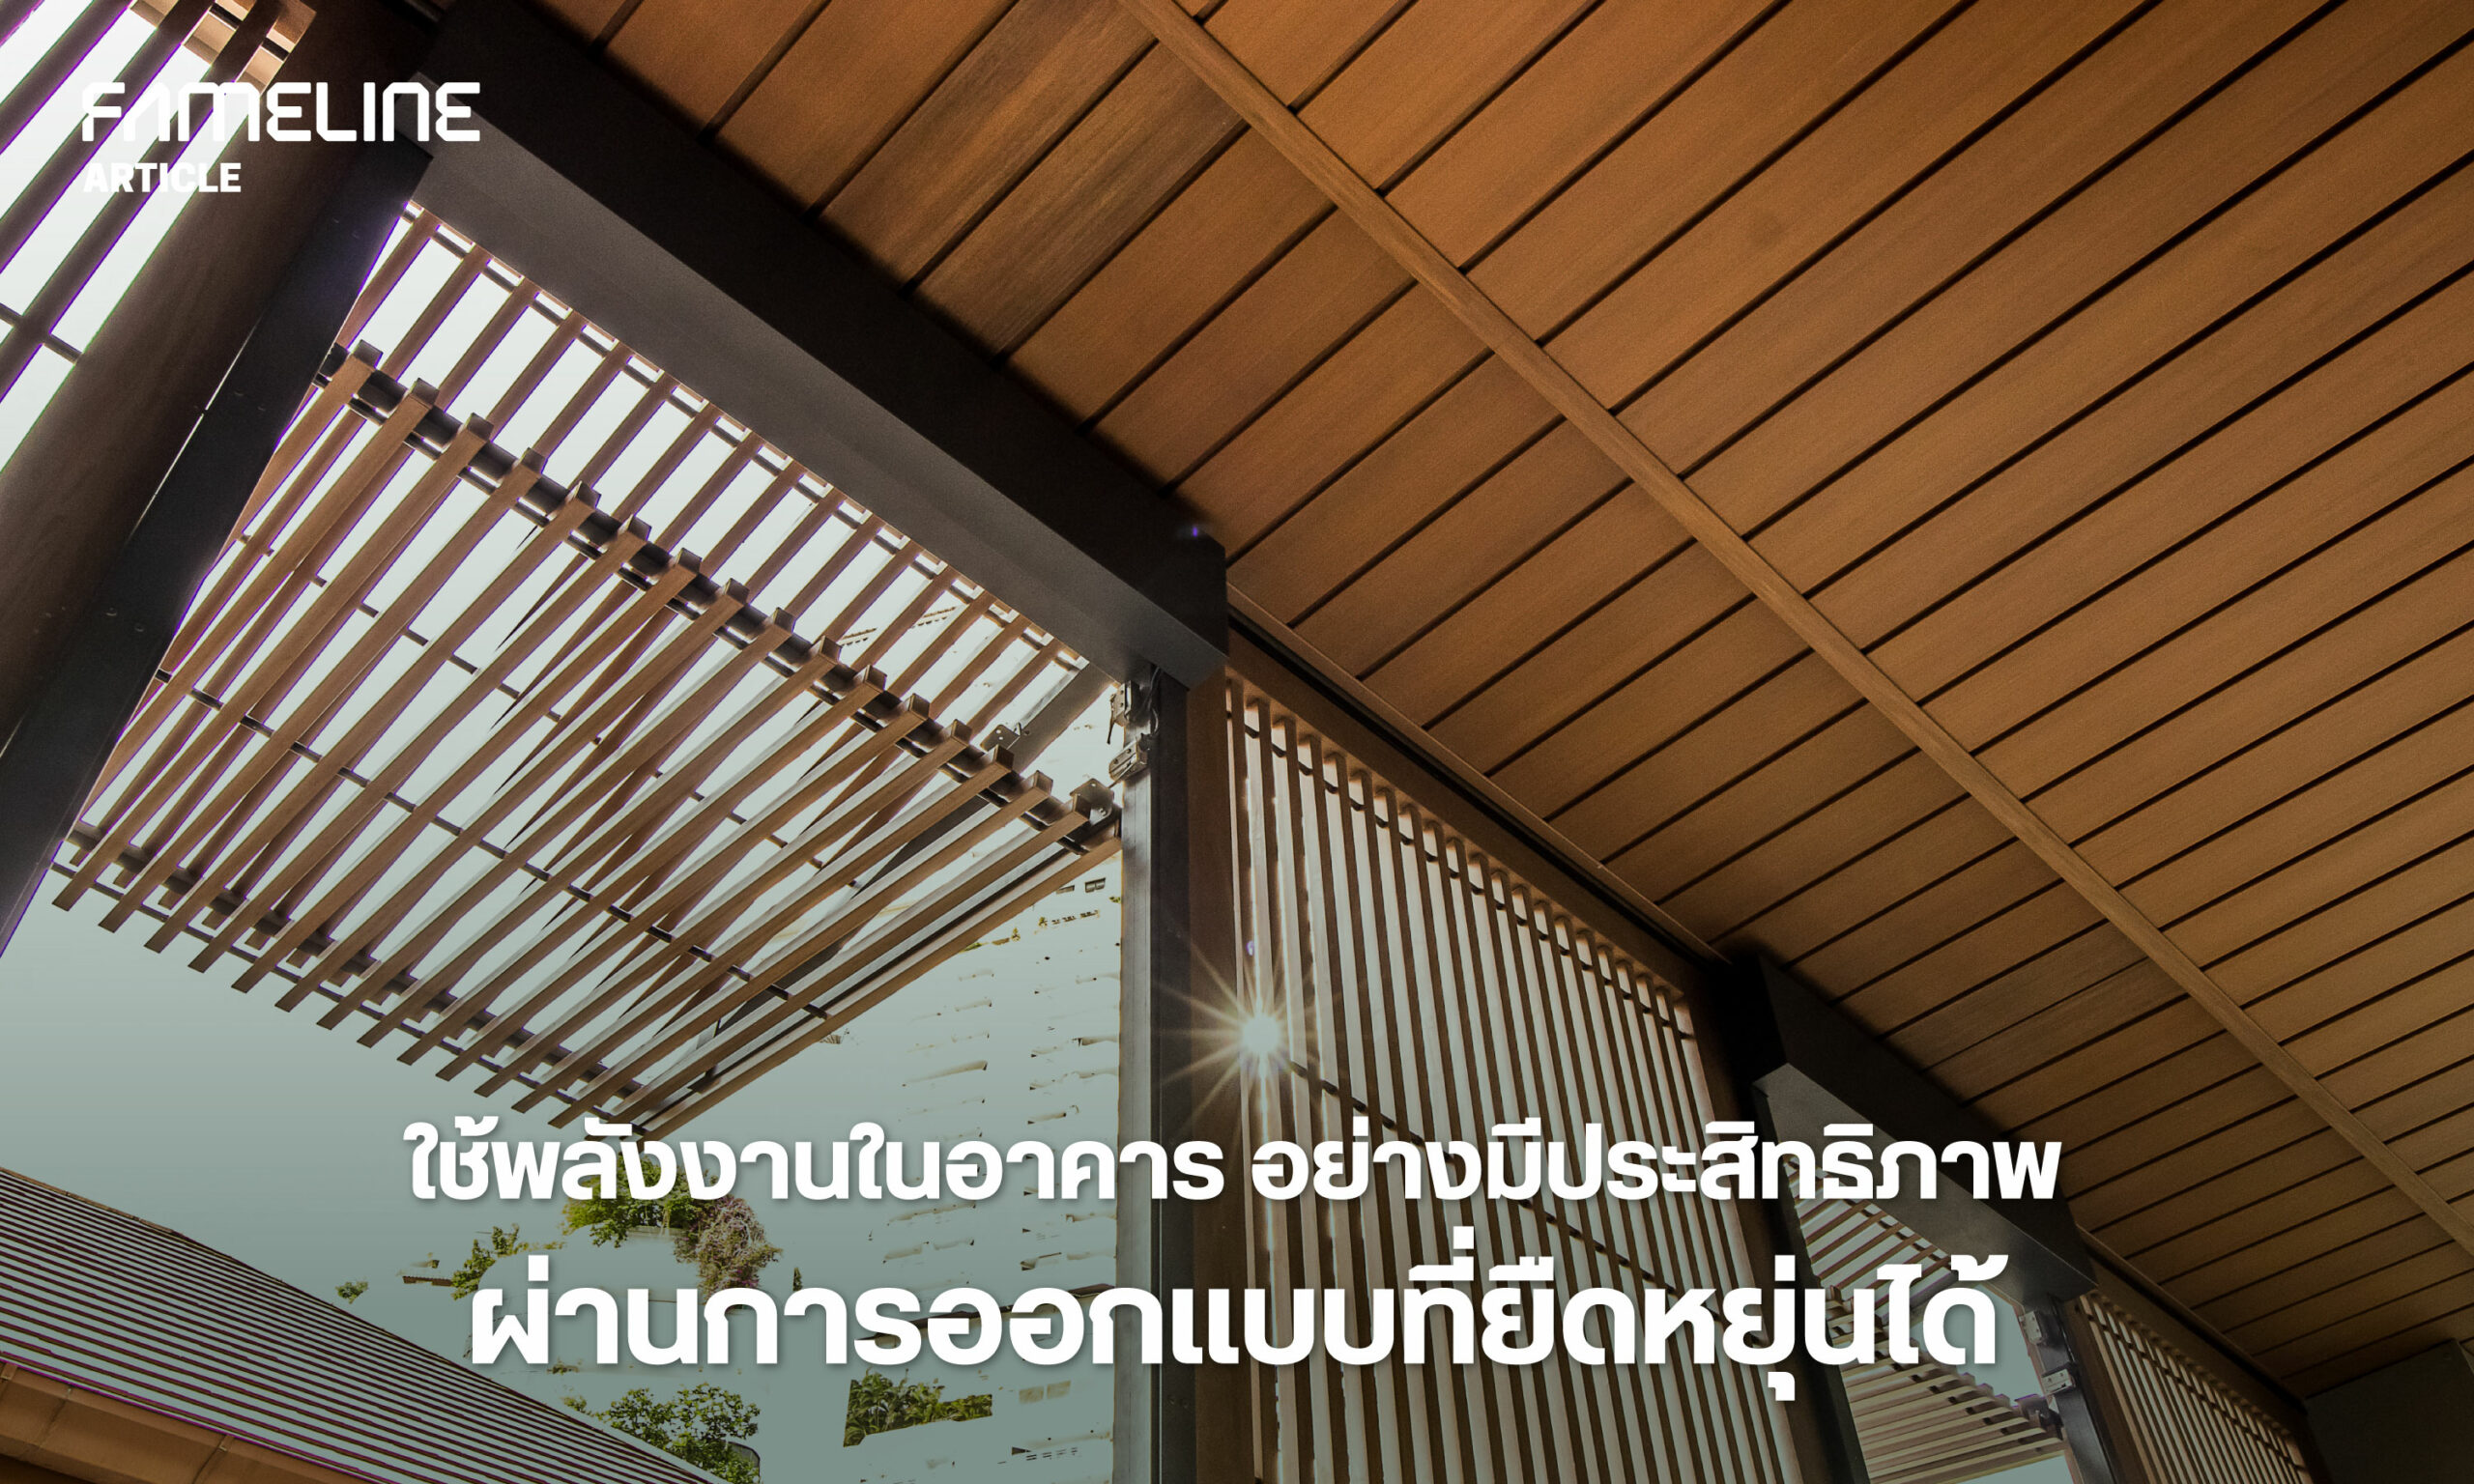 This image appears to be a promotional or informational banner related to architecture or building materials. The banner shows a section of a modern structure with wooden elements and metal frames, likely part of a sun shading system. There's a contrasting play of light and shadows, showcasing the effectiveness of the sun shading in a building's design. The text, not fully visible in the image, suggests a focus on energy efficiency and flexible design in construction or architecture, possibly associated with a brand or product line named FAMELINE. The aesthetic of the image aligns with contemporary design trends emphasizing functionality and sustainability.